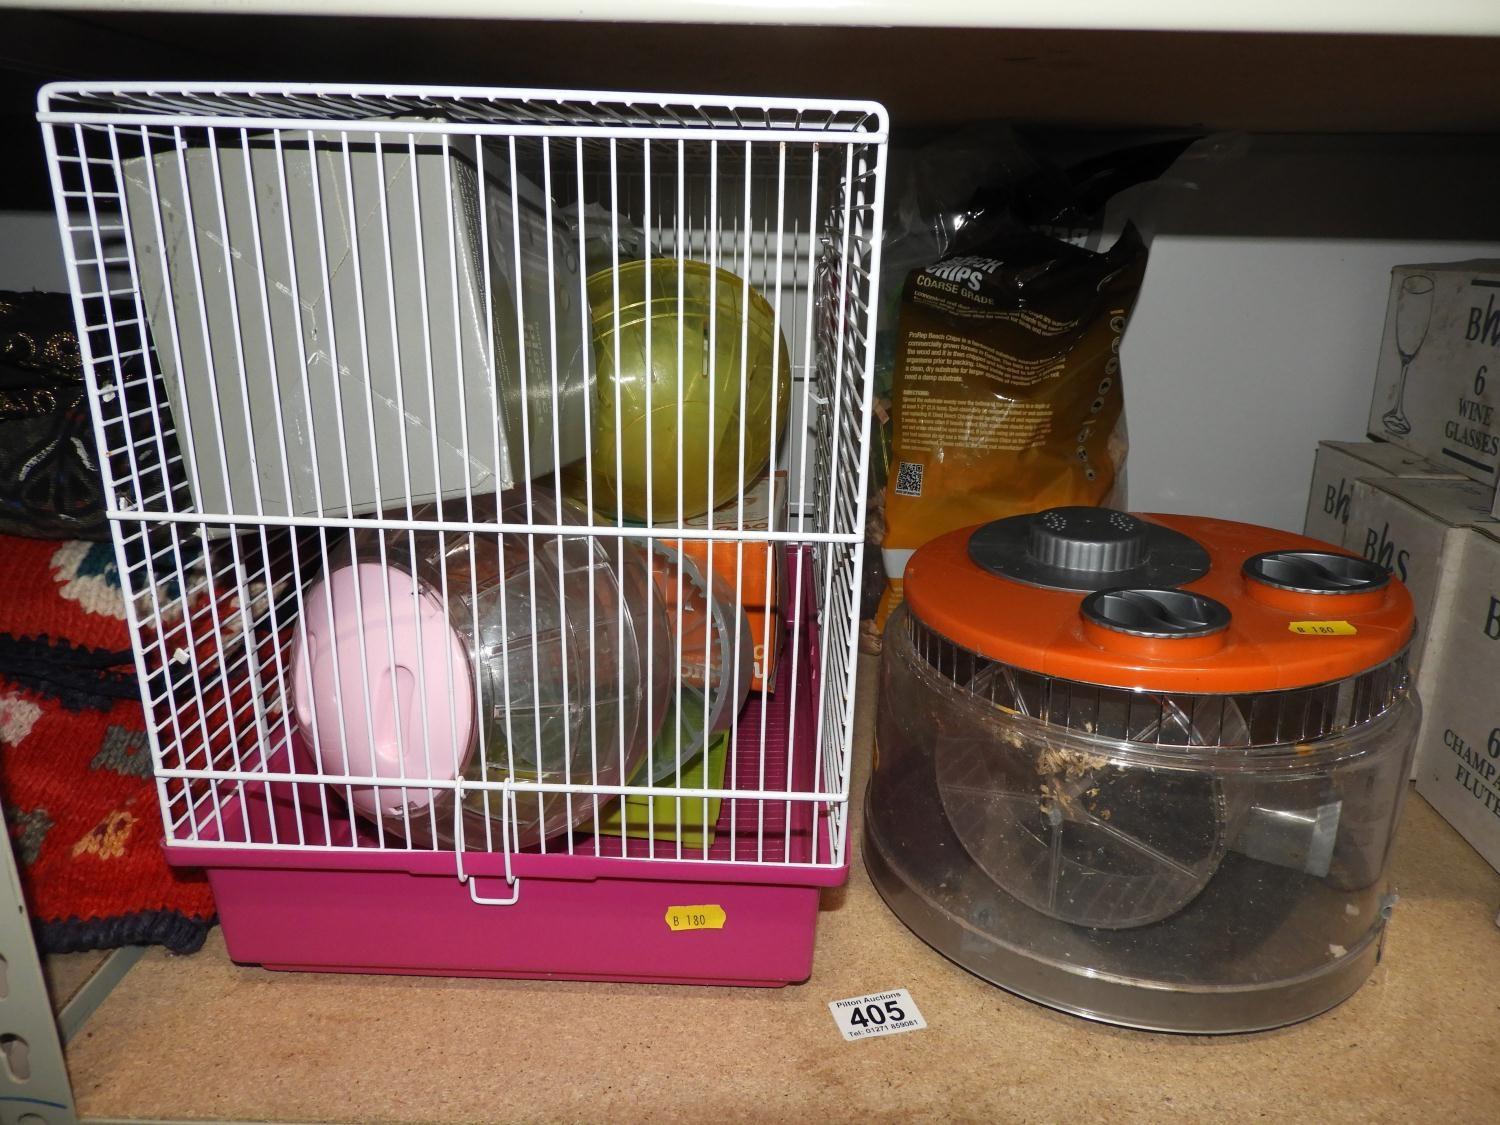 Animal Cage and Accessories